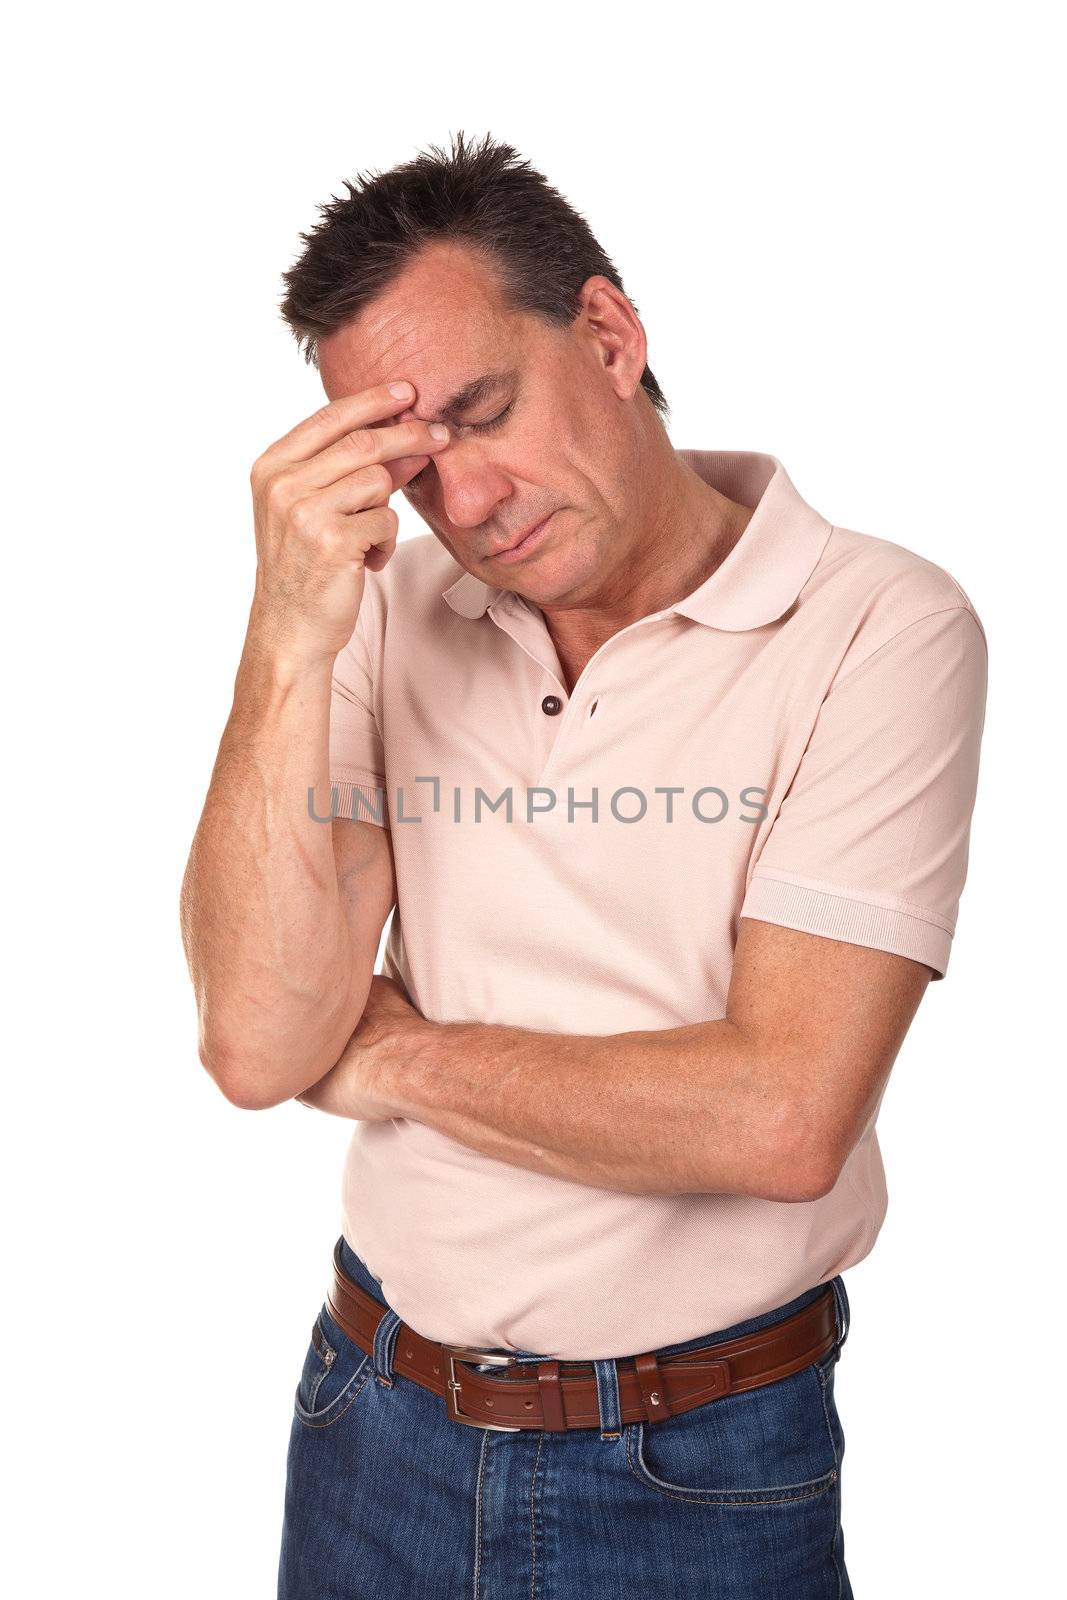 Anxious Stressed Man Holding Head in Pain by scheriton